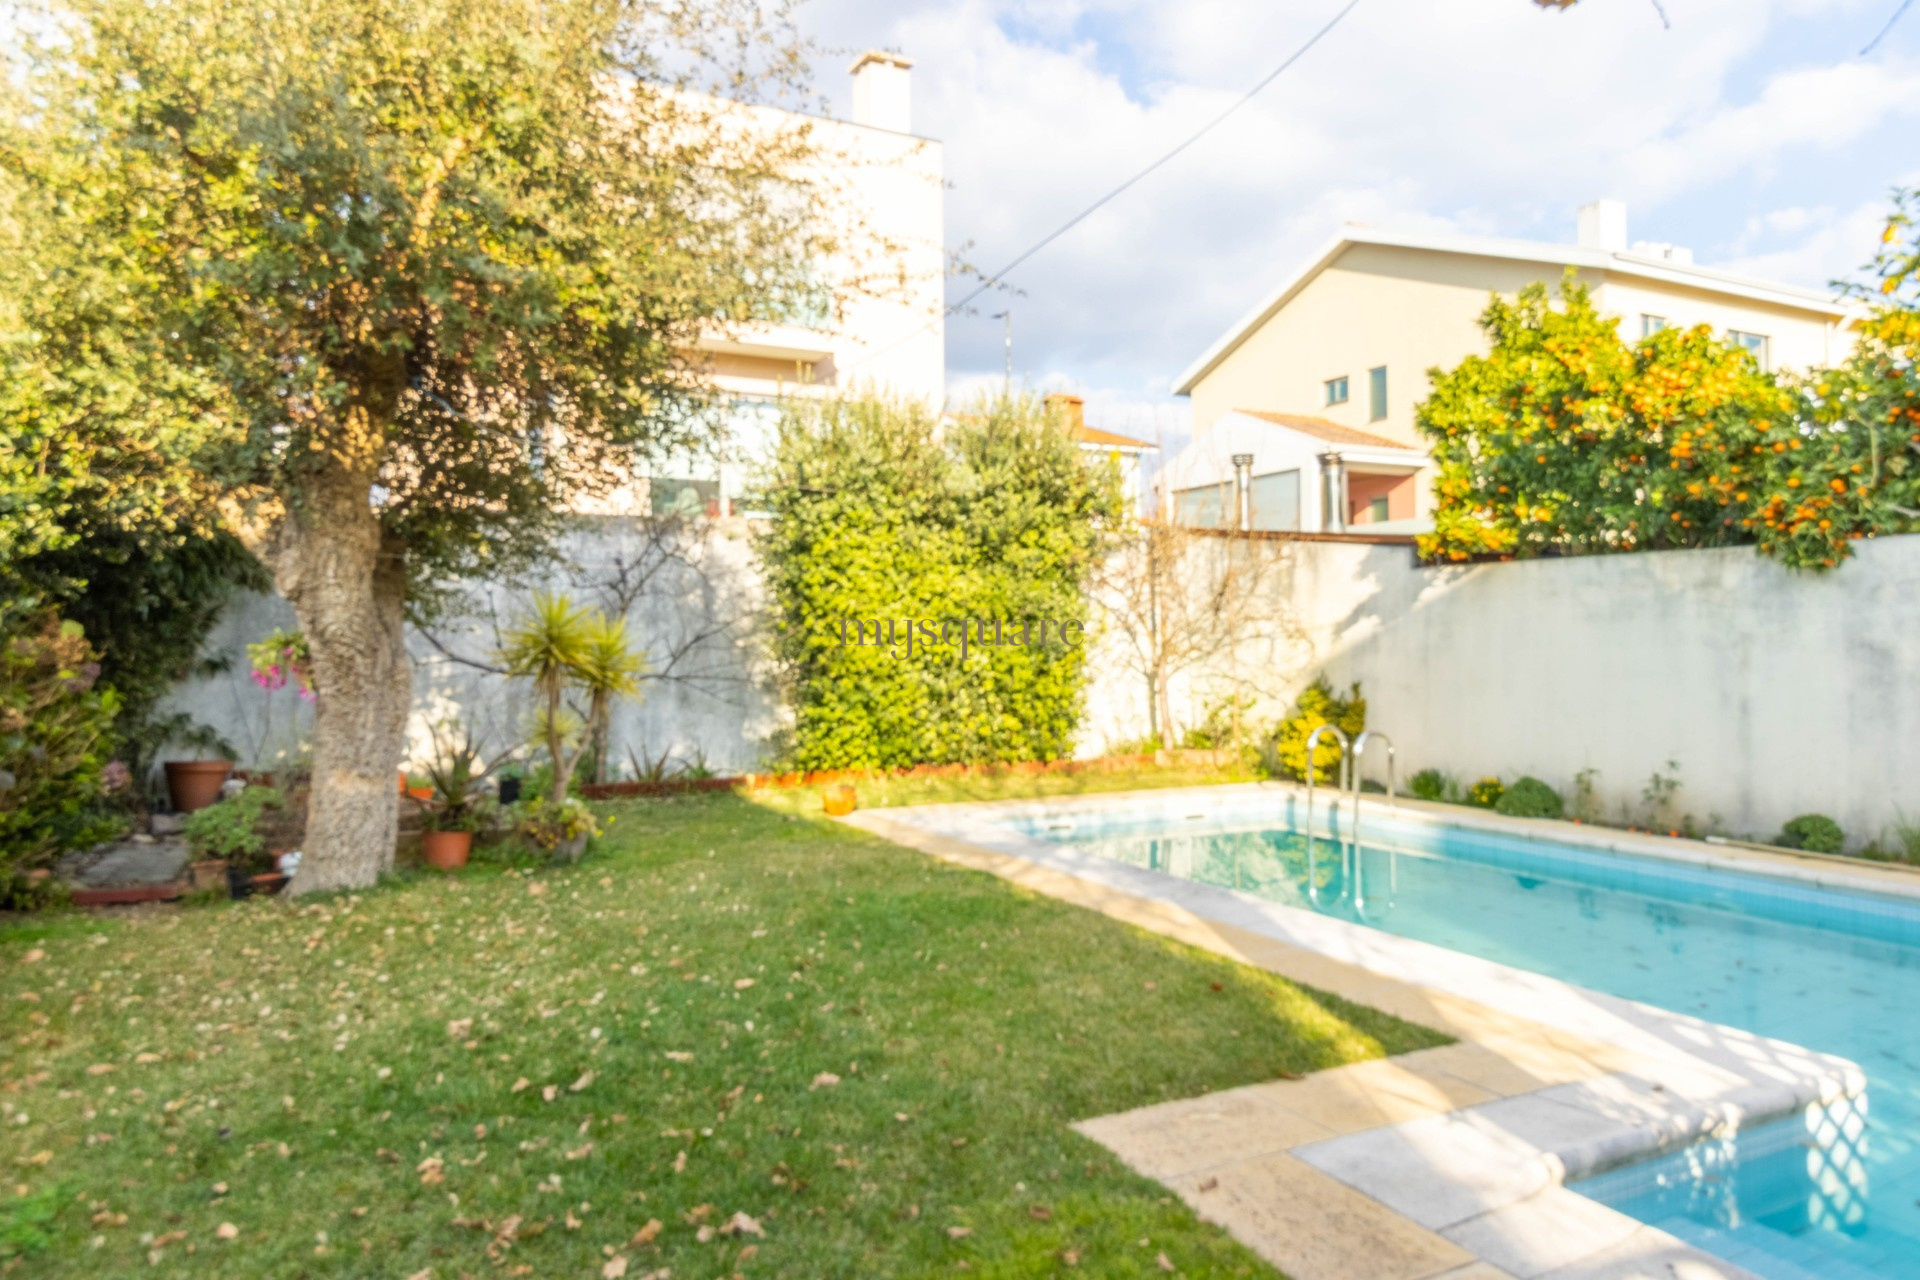 3 BEDROOM HOUSE WITH GARDEN AND SWIMMING POOL IN PEROSINHO, GAIA